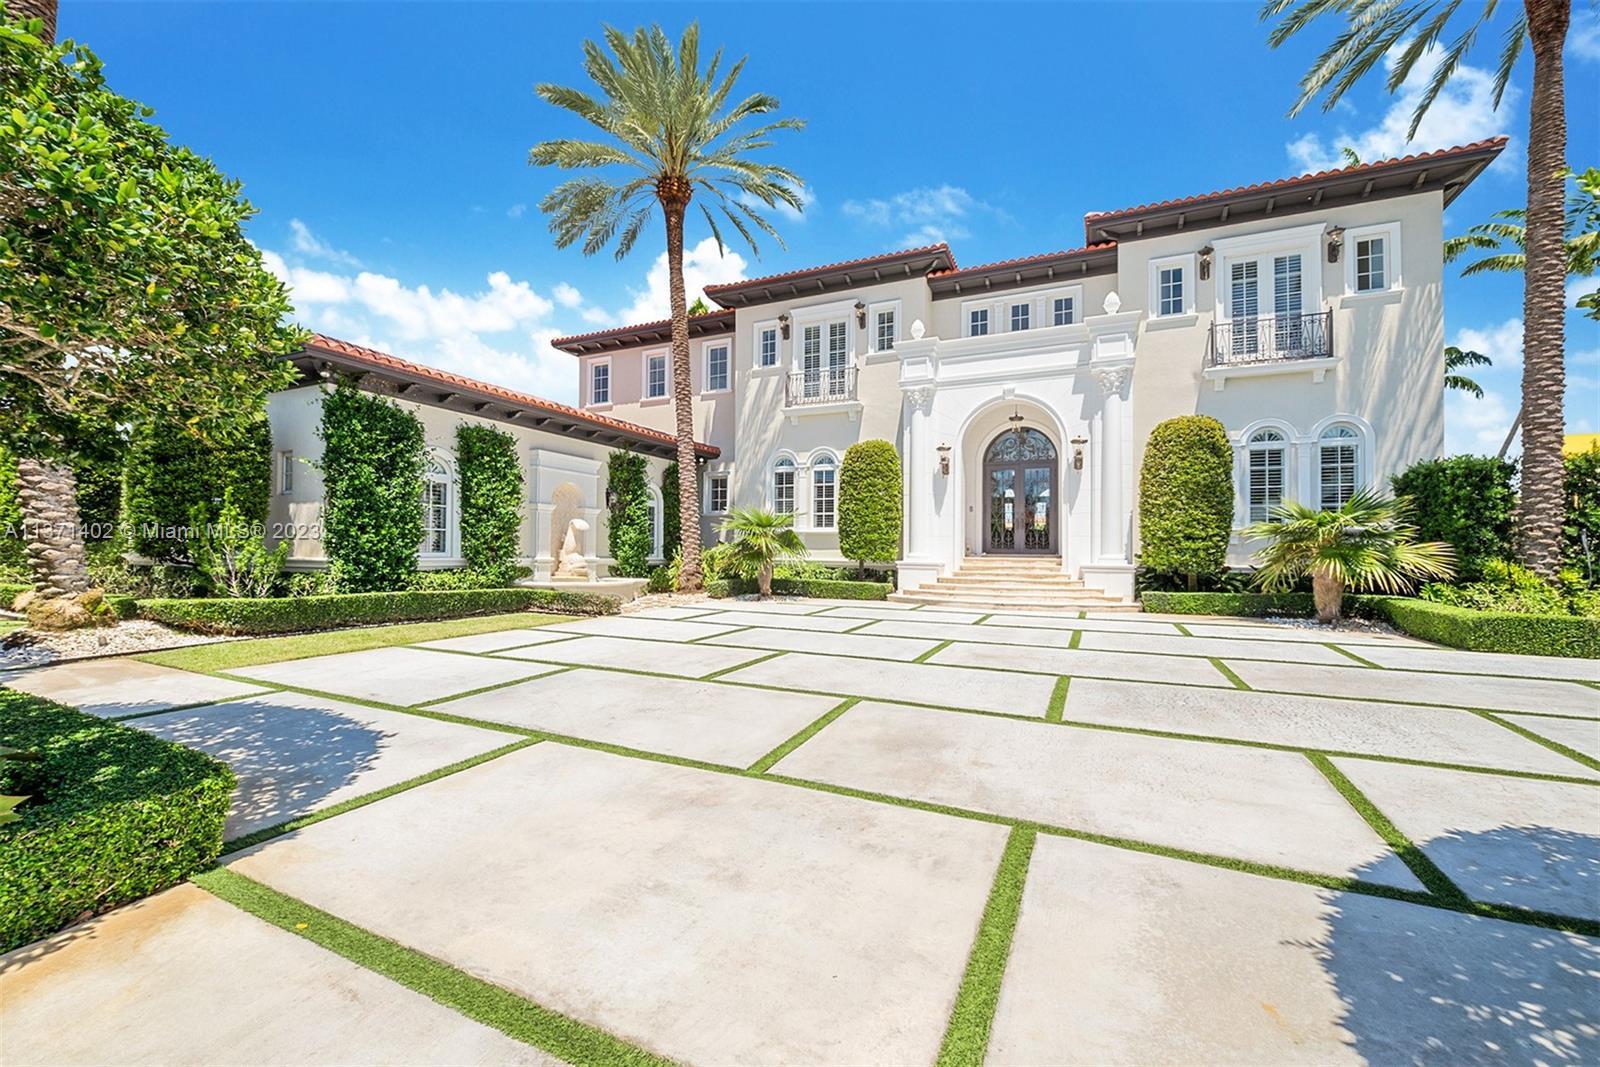 This newer constructed Mediterranean estate is privately located in the prestigious community of Old